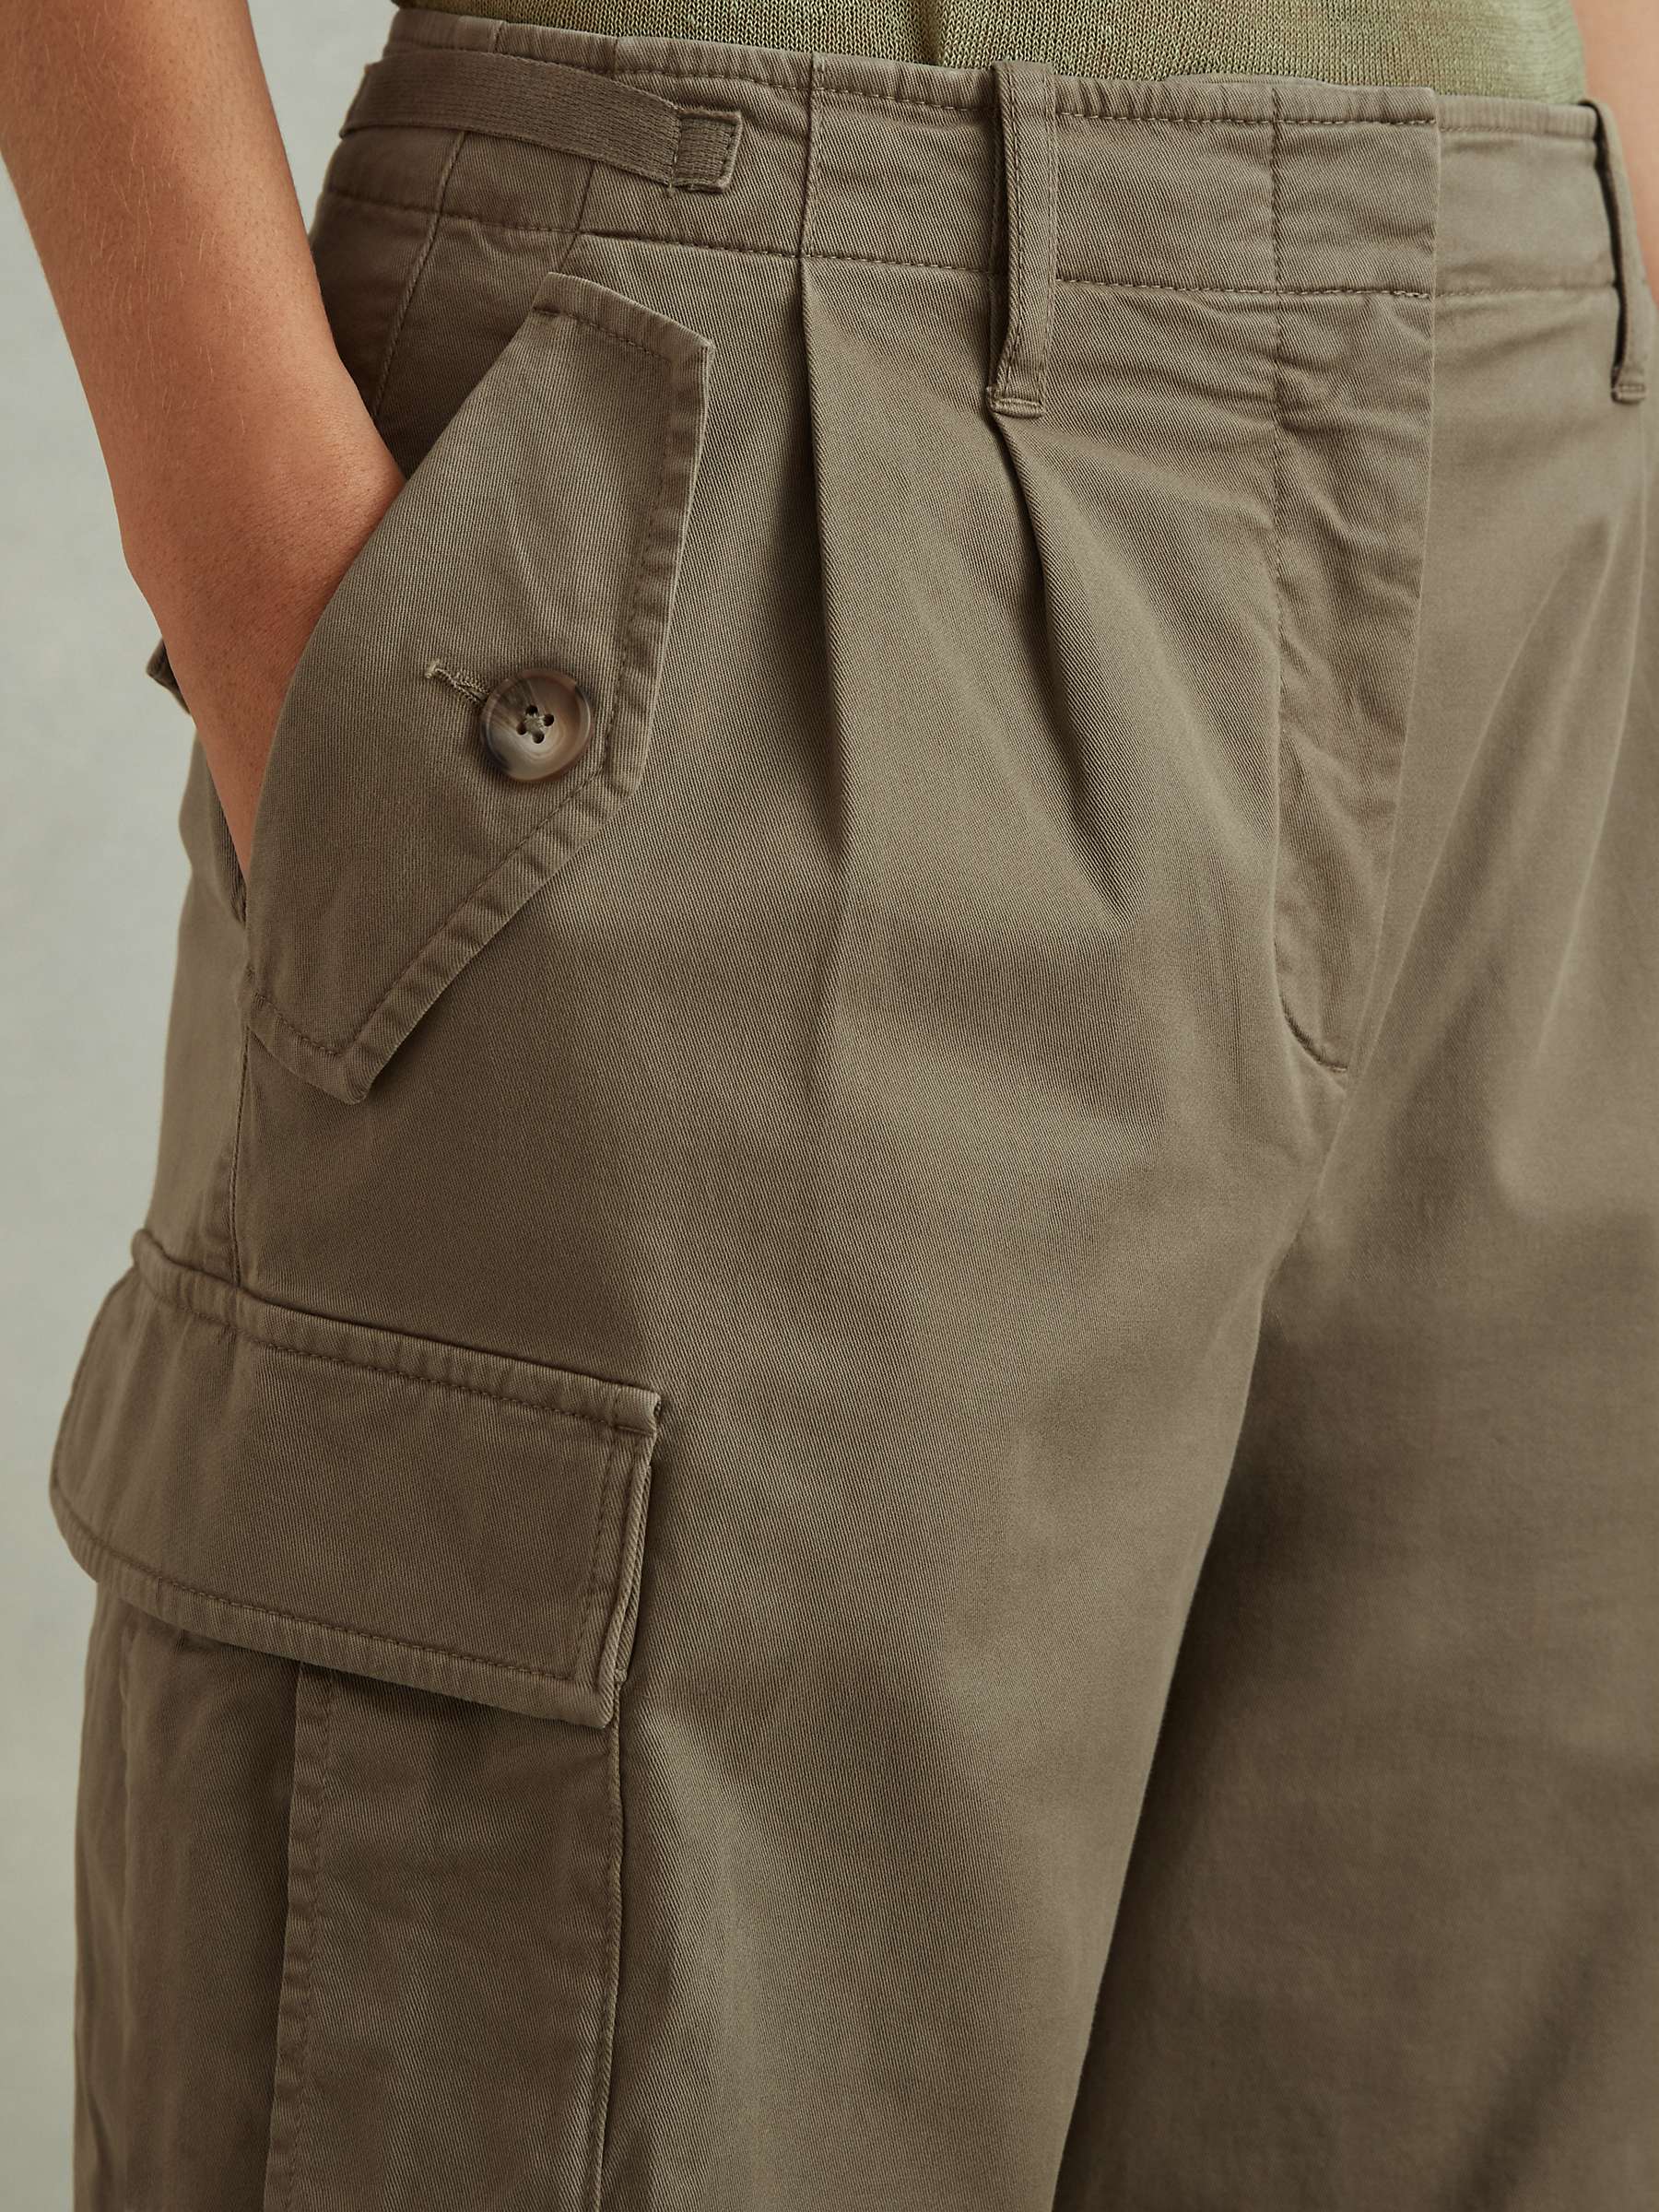 Buy Reiss Indie Tapered Combat Trousers, Khaki Online at johnlewis.com